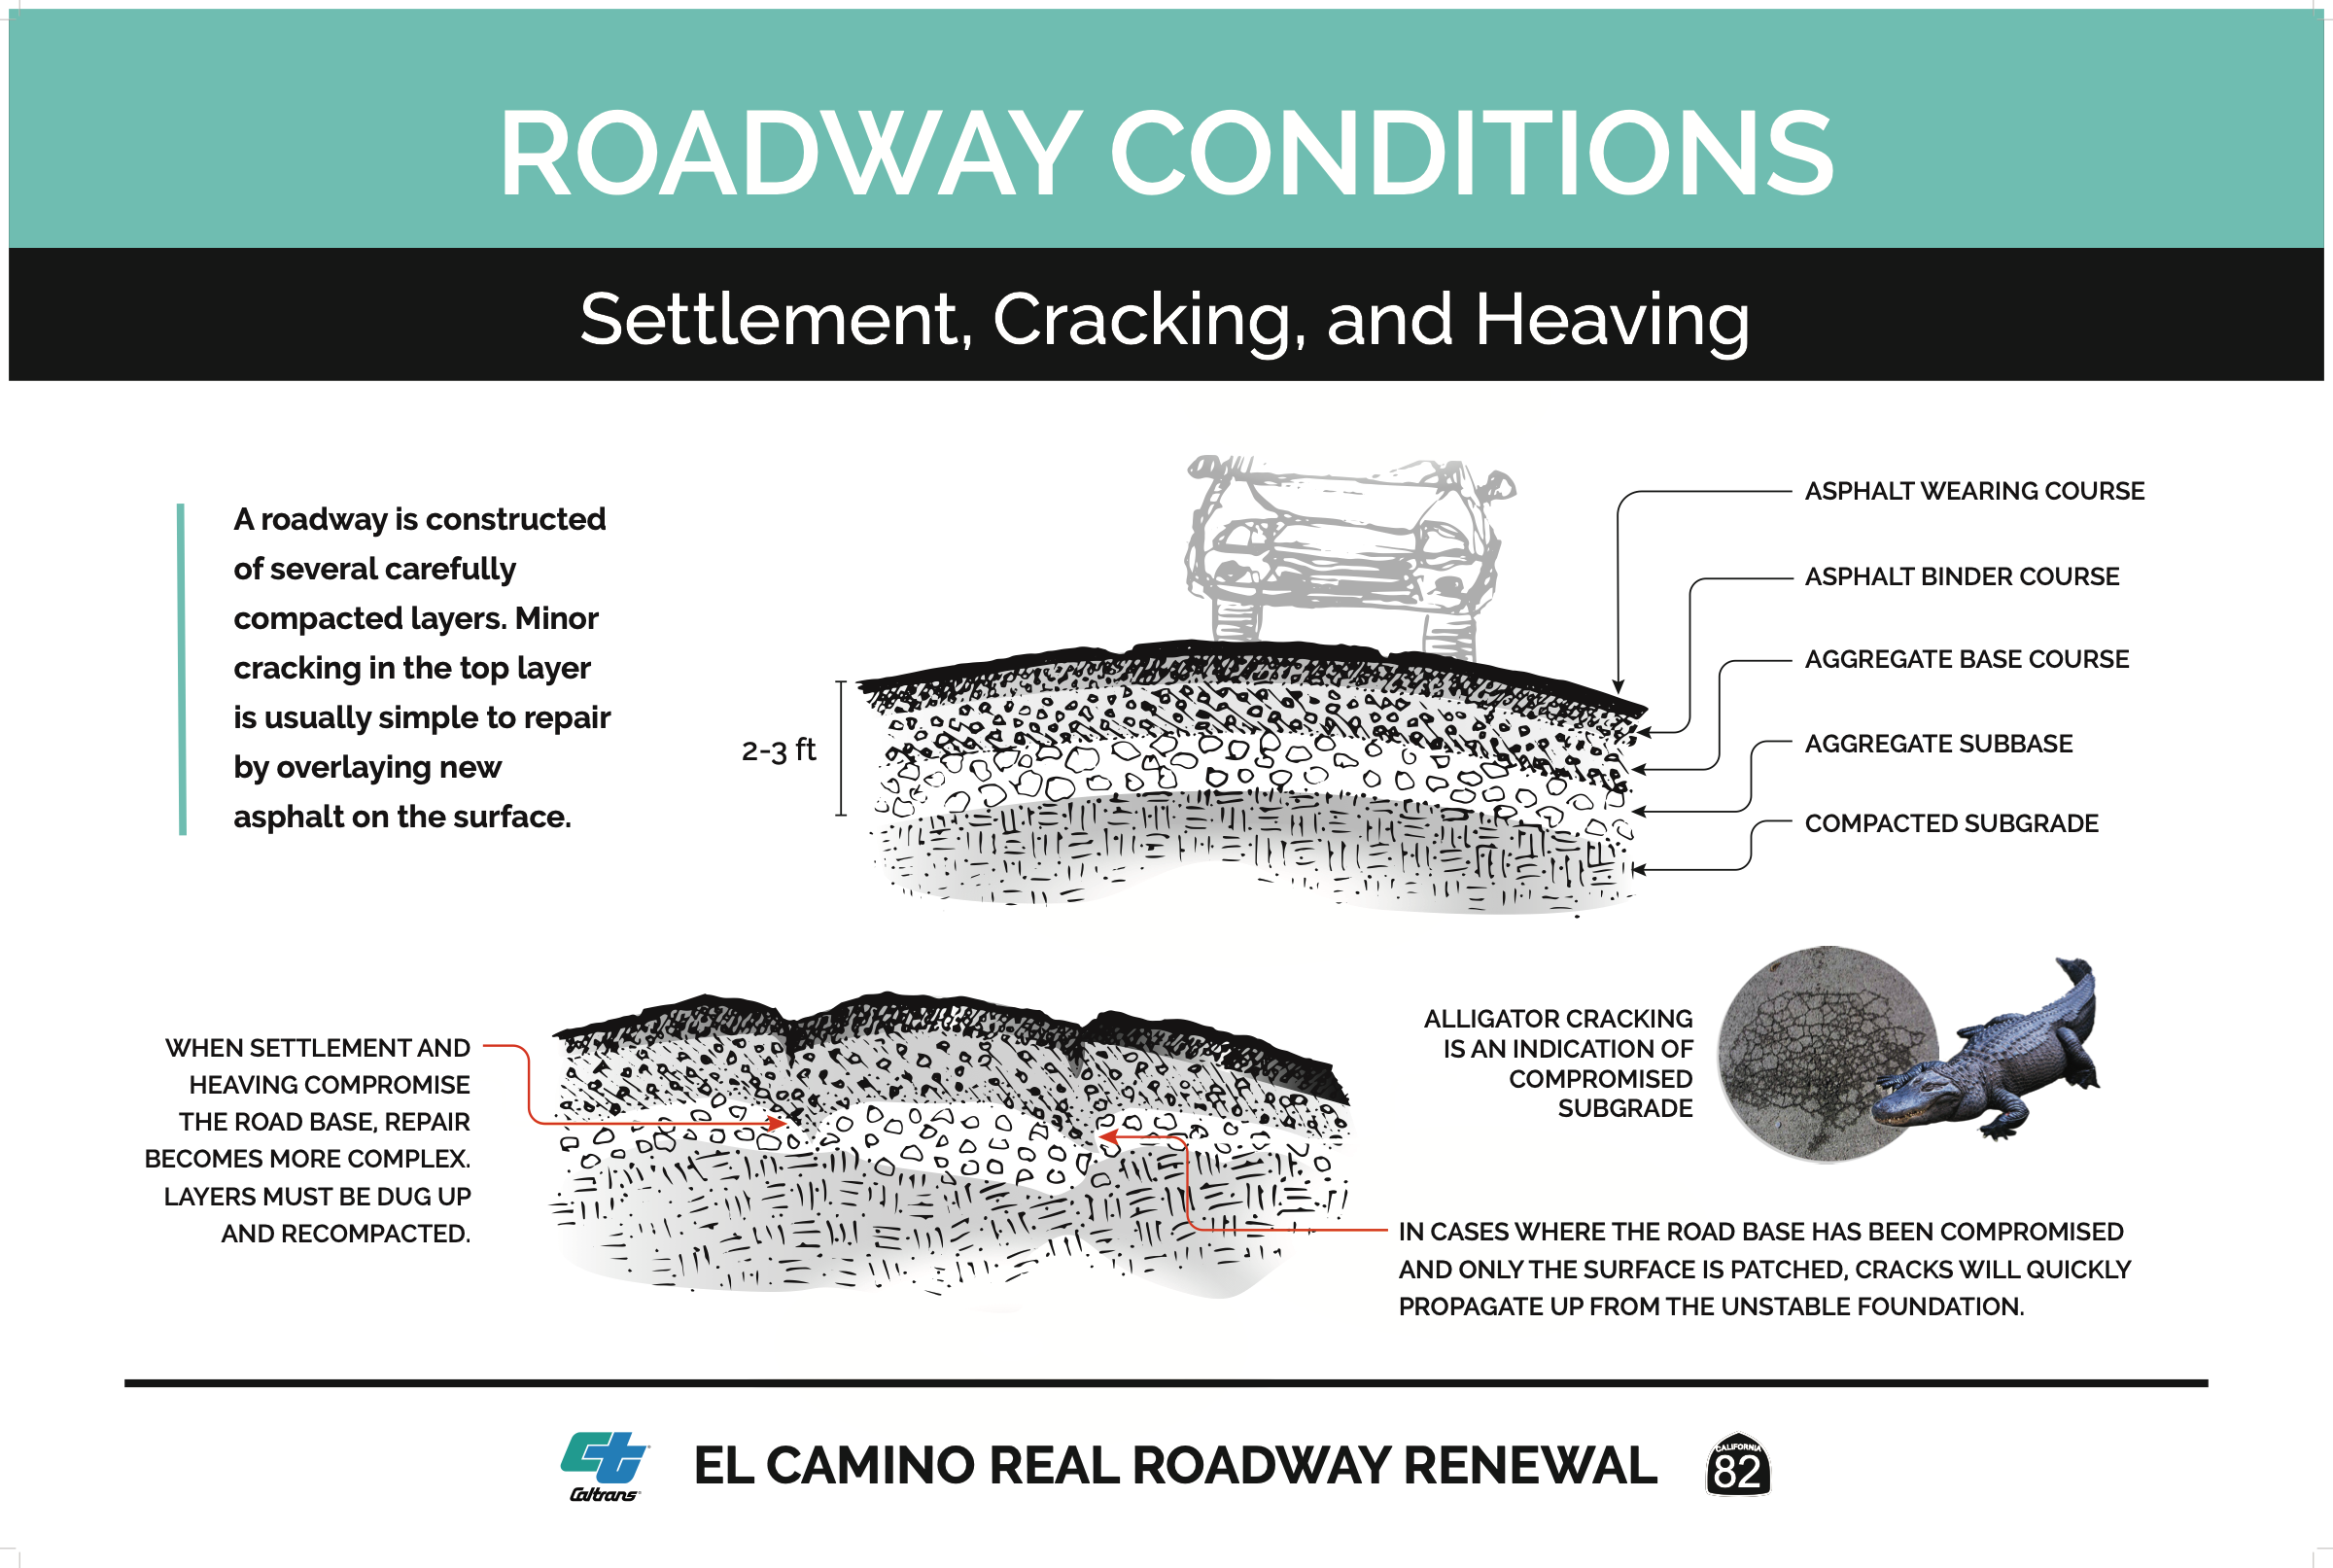 roadway conditions - settlement, cracking, and heaving